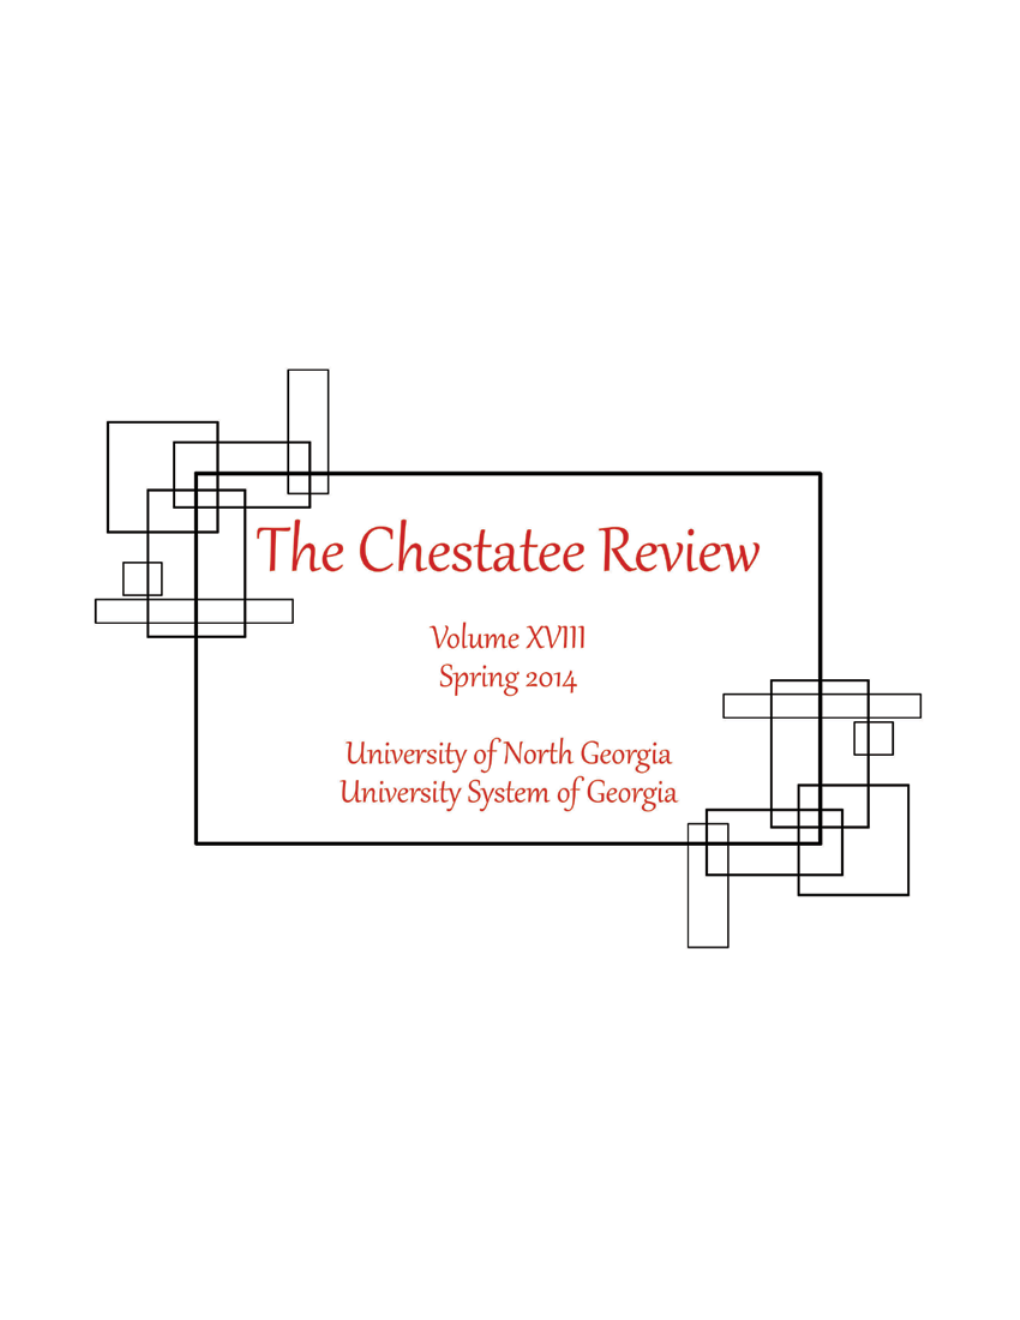 Chestatee Review 2014